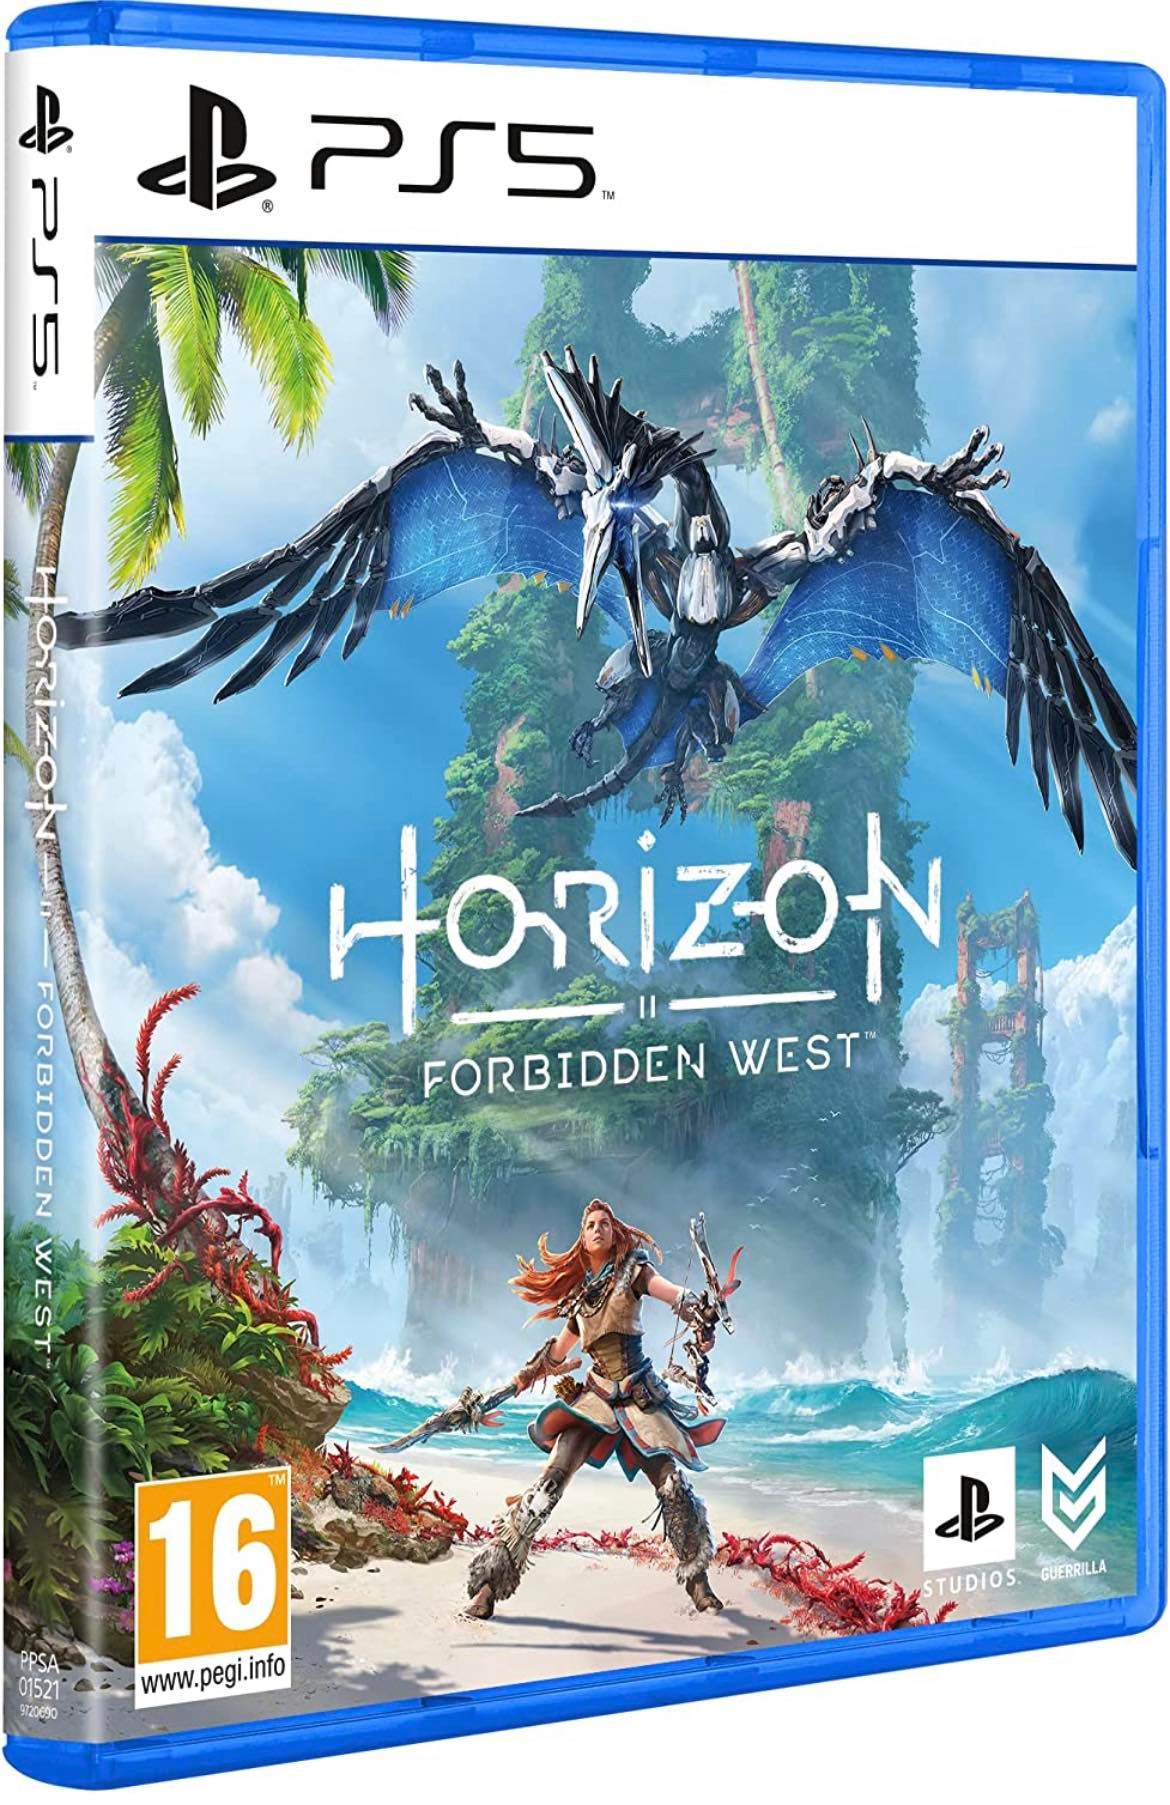 PS5 Horizon Forbidden West Game - Sealed, Never Used